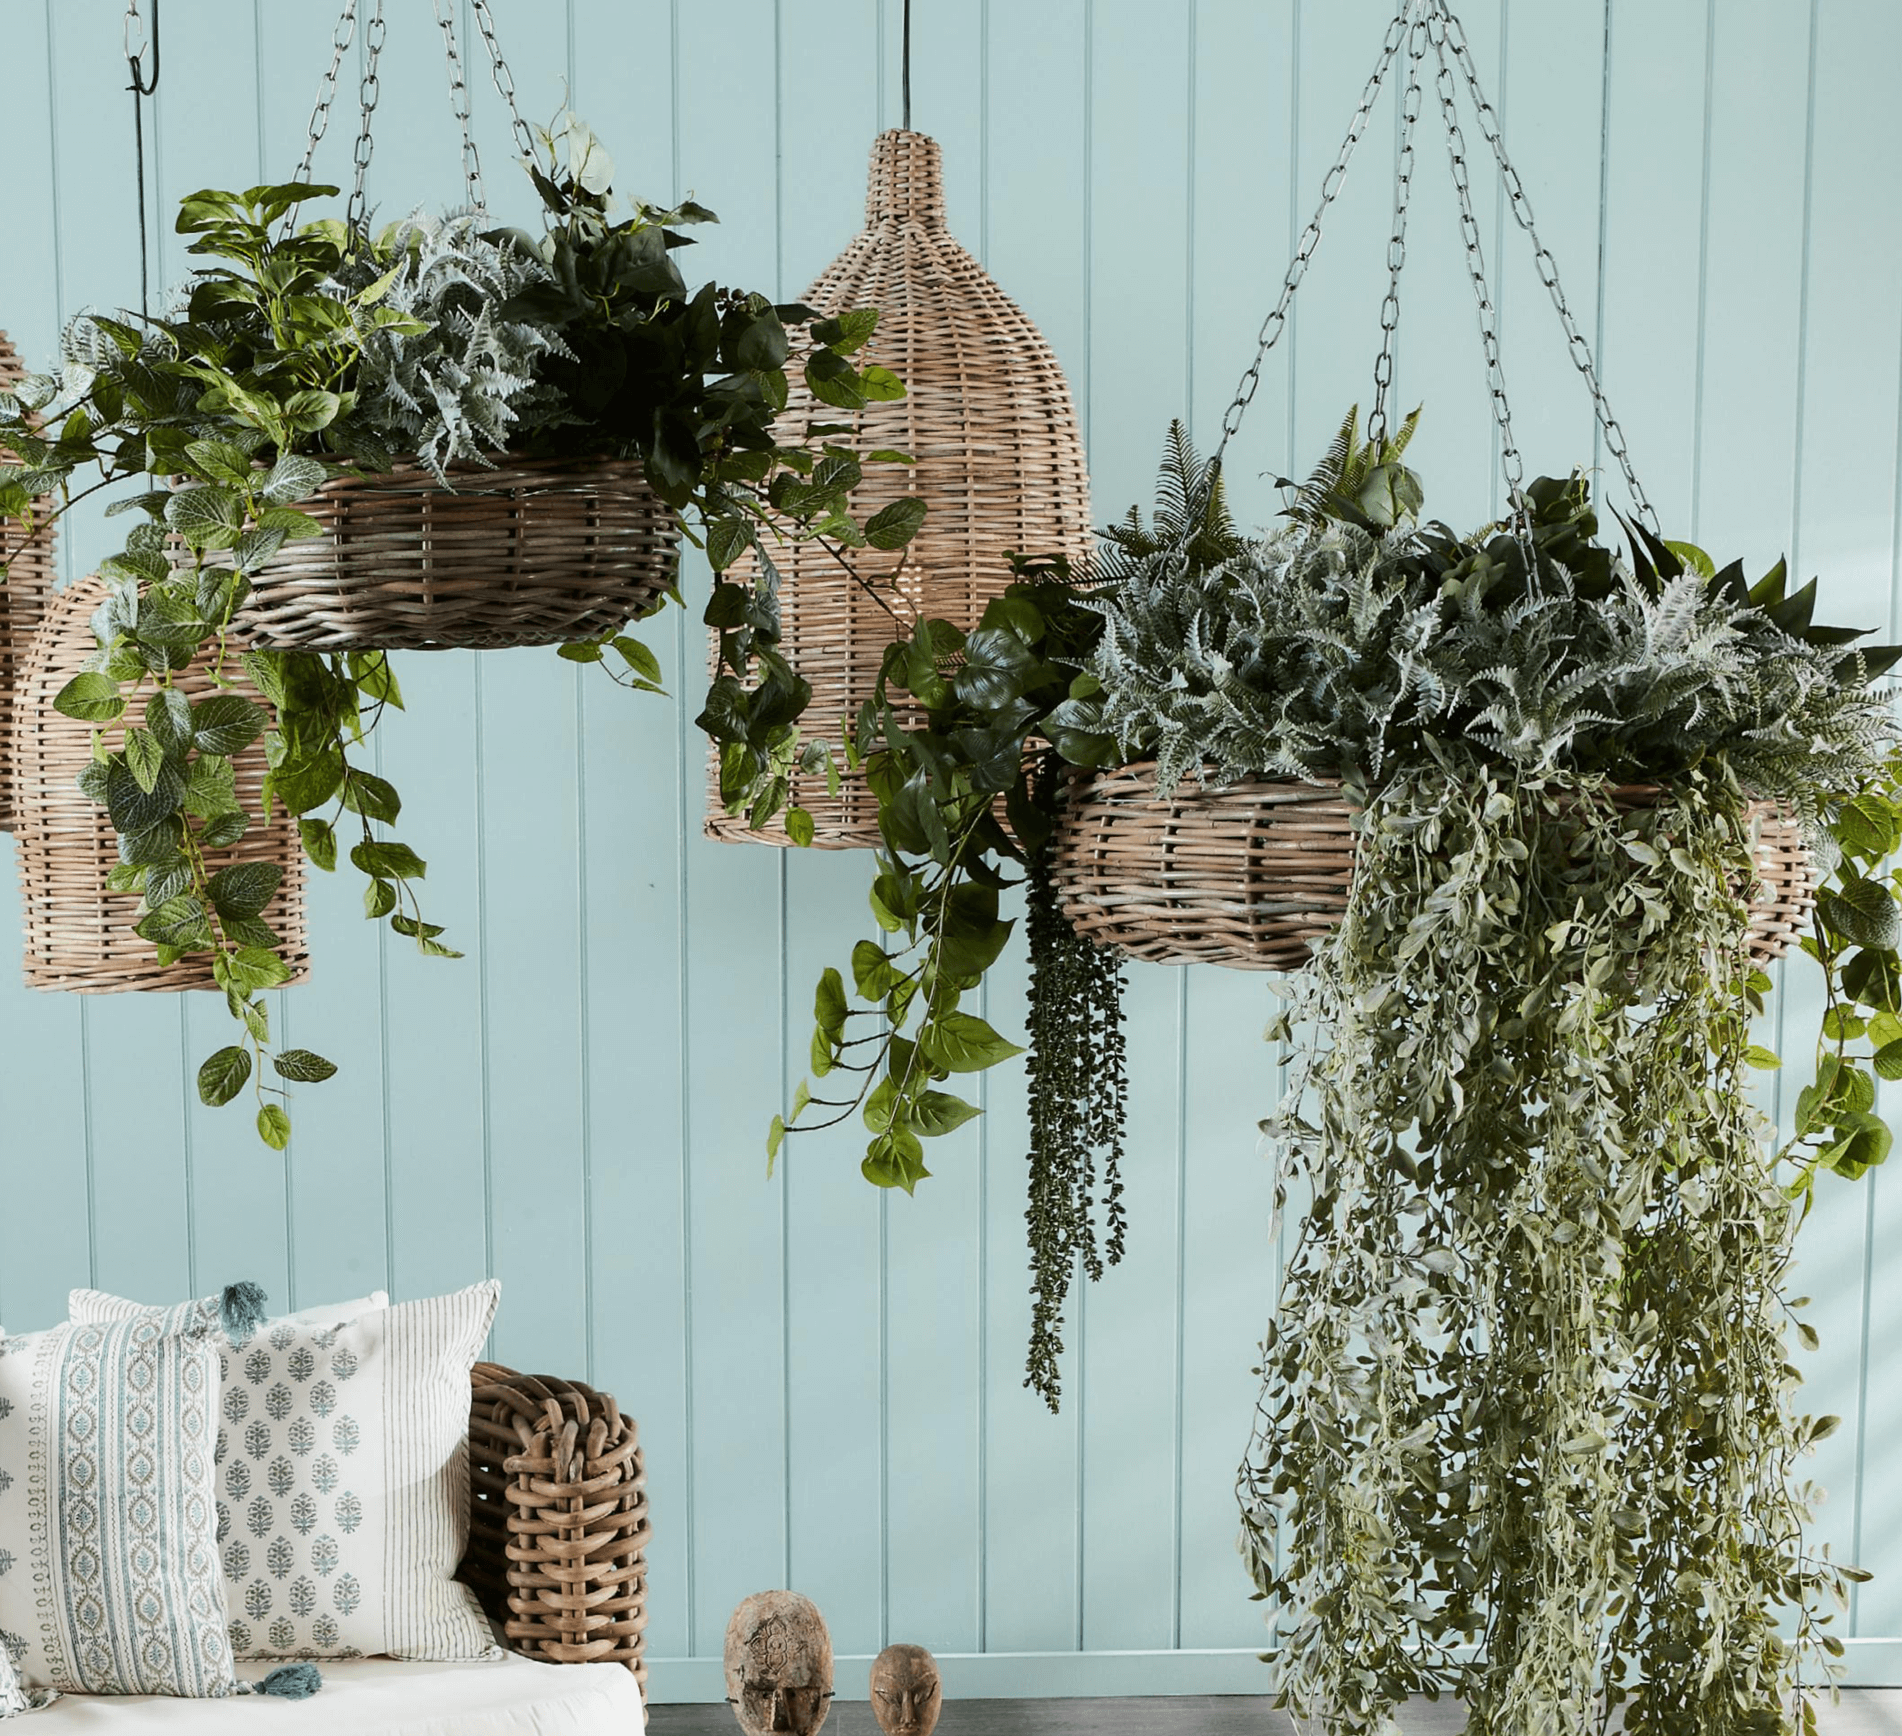 faux greenery in hanging baskets